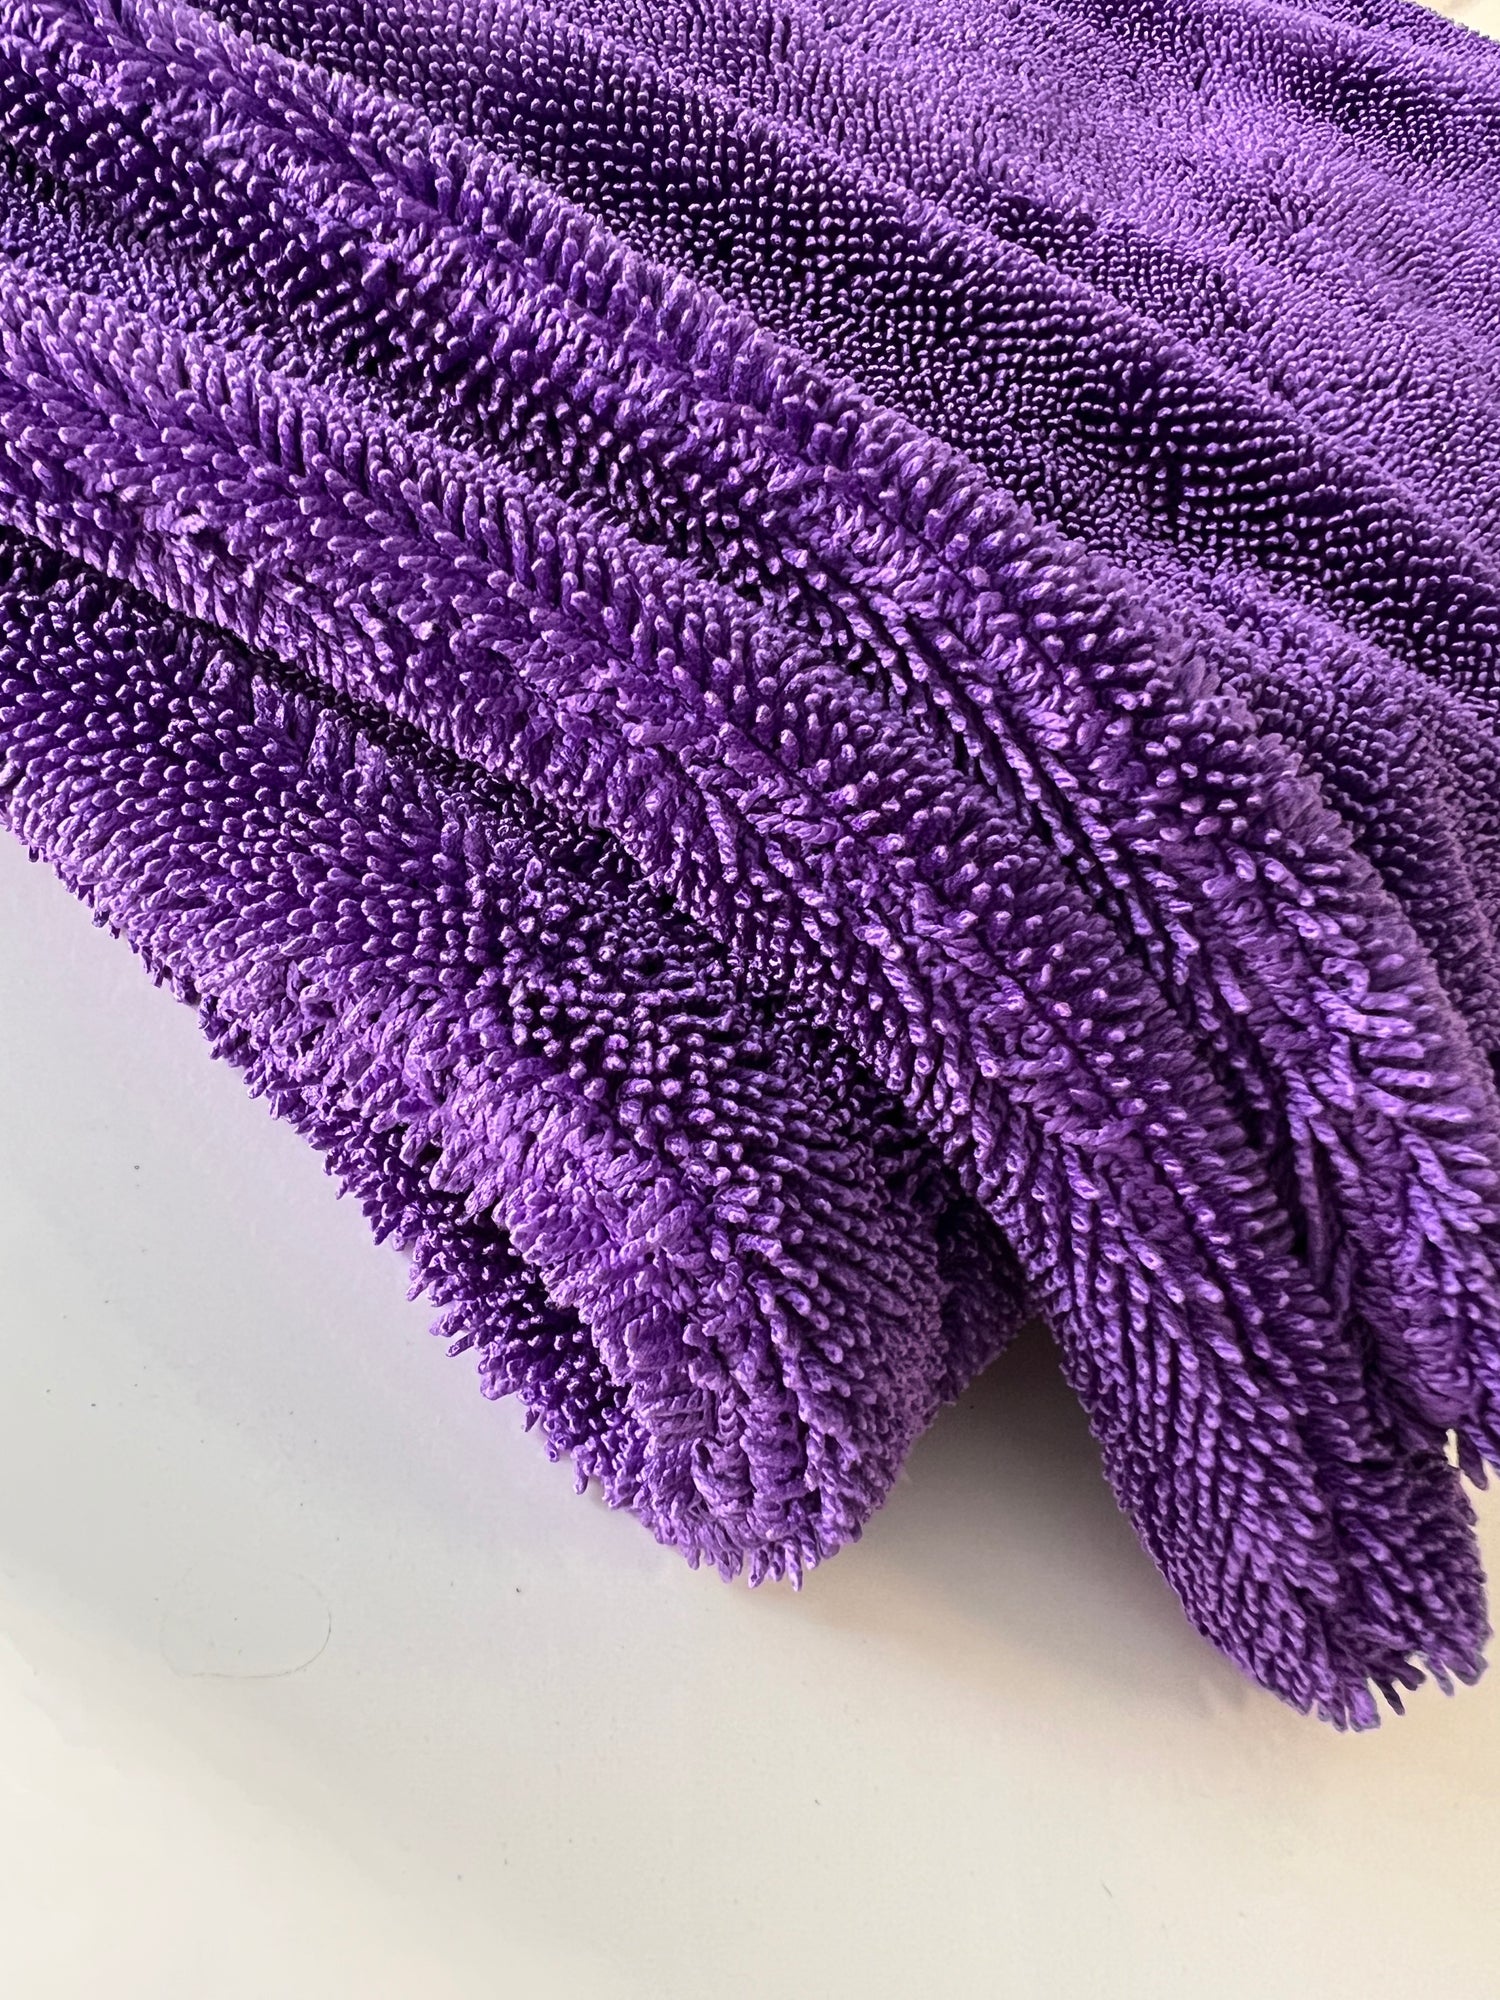 GTF Microfibre Car Cleaning Cloths, Upgraded 1200gsm Ultra-Thick Car Drying Towel